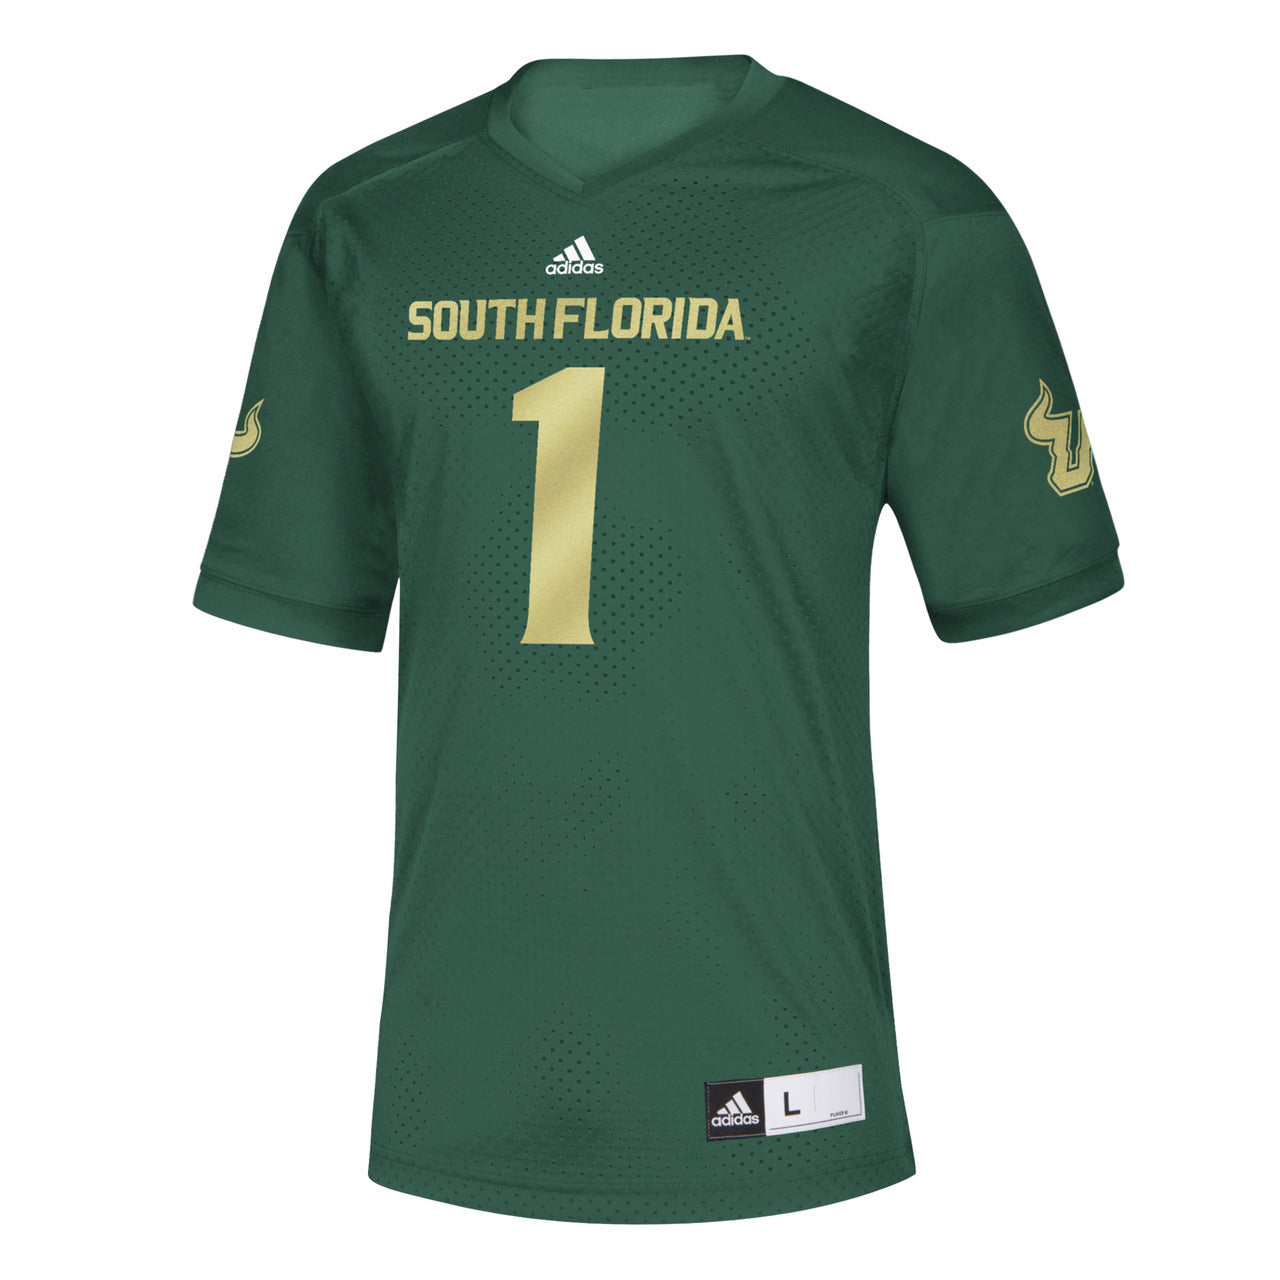 USF Football Unveils New Adidas Jerseys with the Help of Former Legends at  Fan Fest - The Daily Stampede